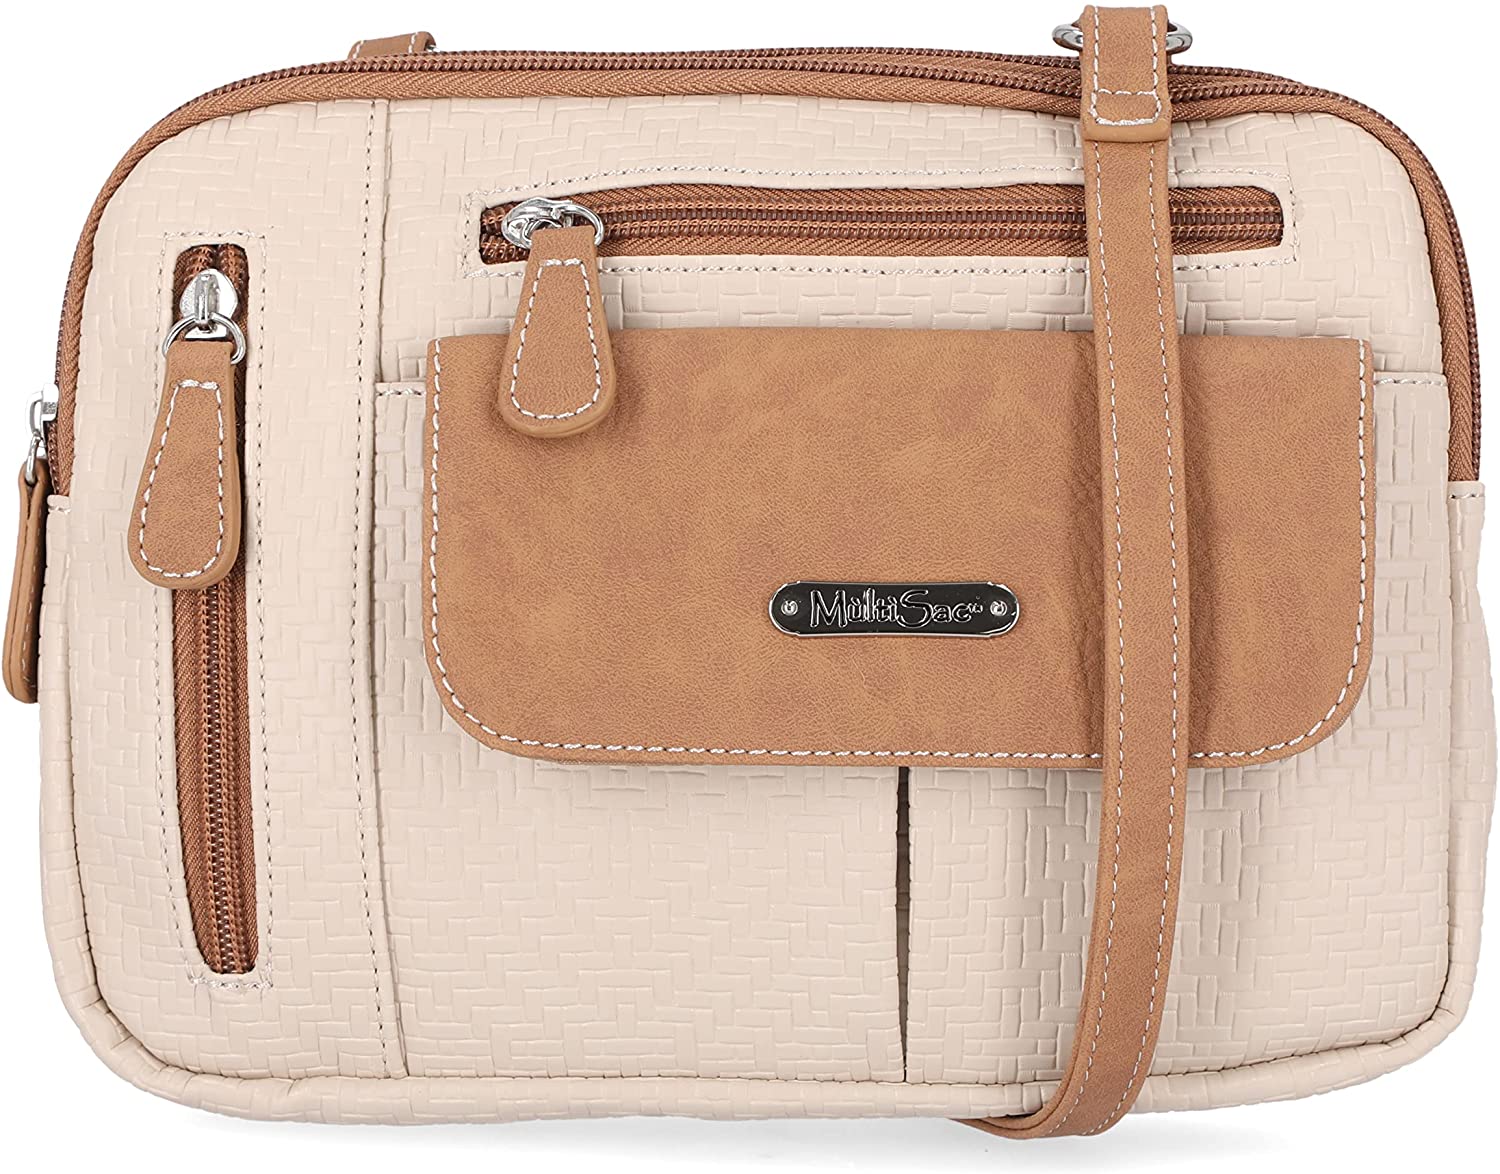 Zippy Triple Compartment Crossbody Bag, Coral Springs